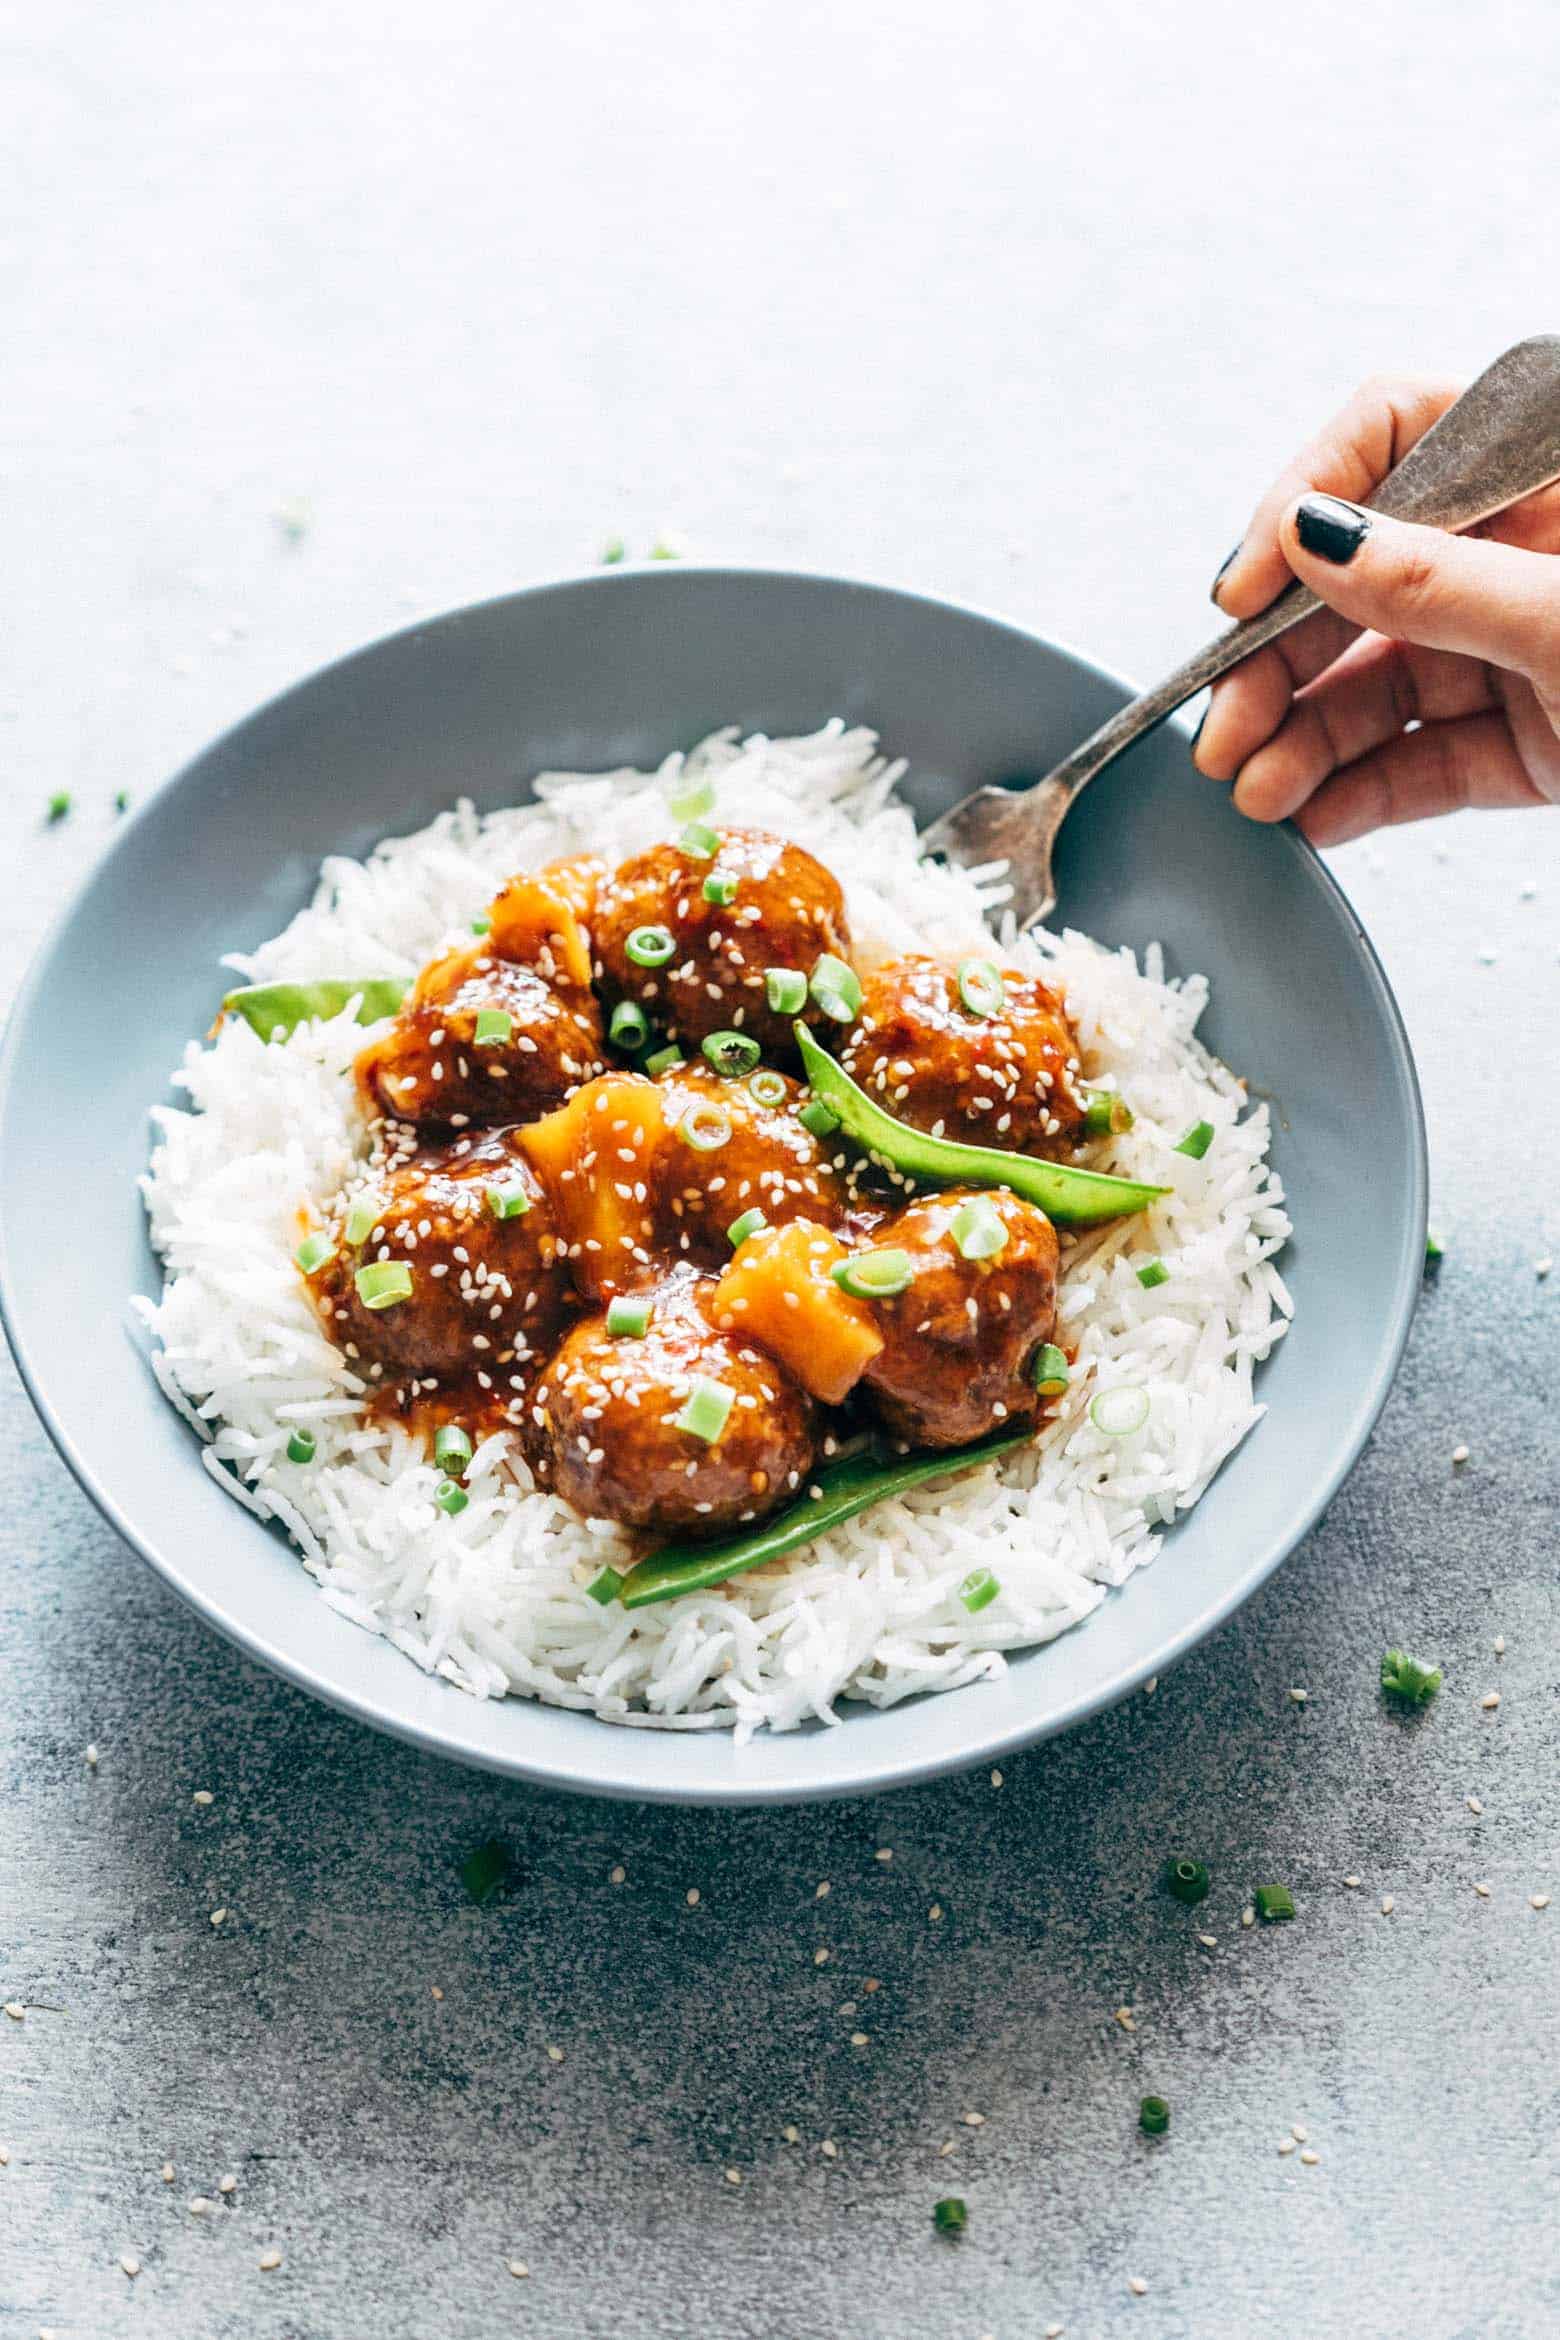 Asian inspired slow cooker teriyaki meatballs with pineapple are super easy, low carb and can be made in your crockpot. Juicy, succulent, these teriyaki pineapple meatballs can also be baked in the oven.